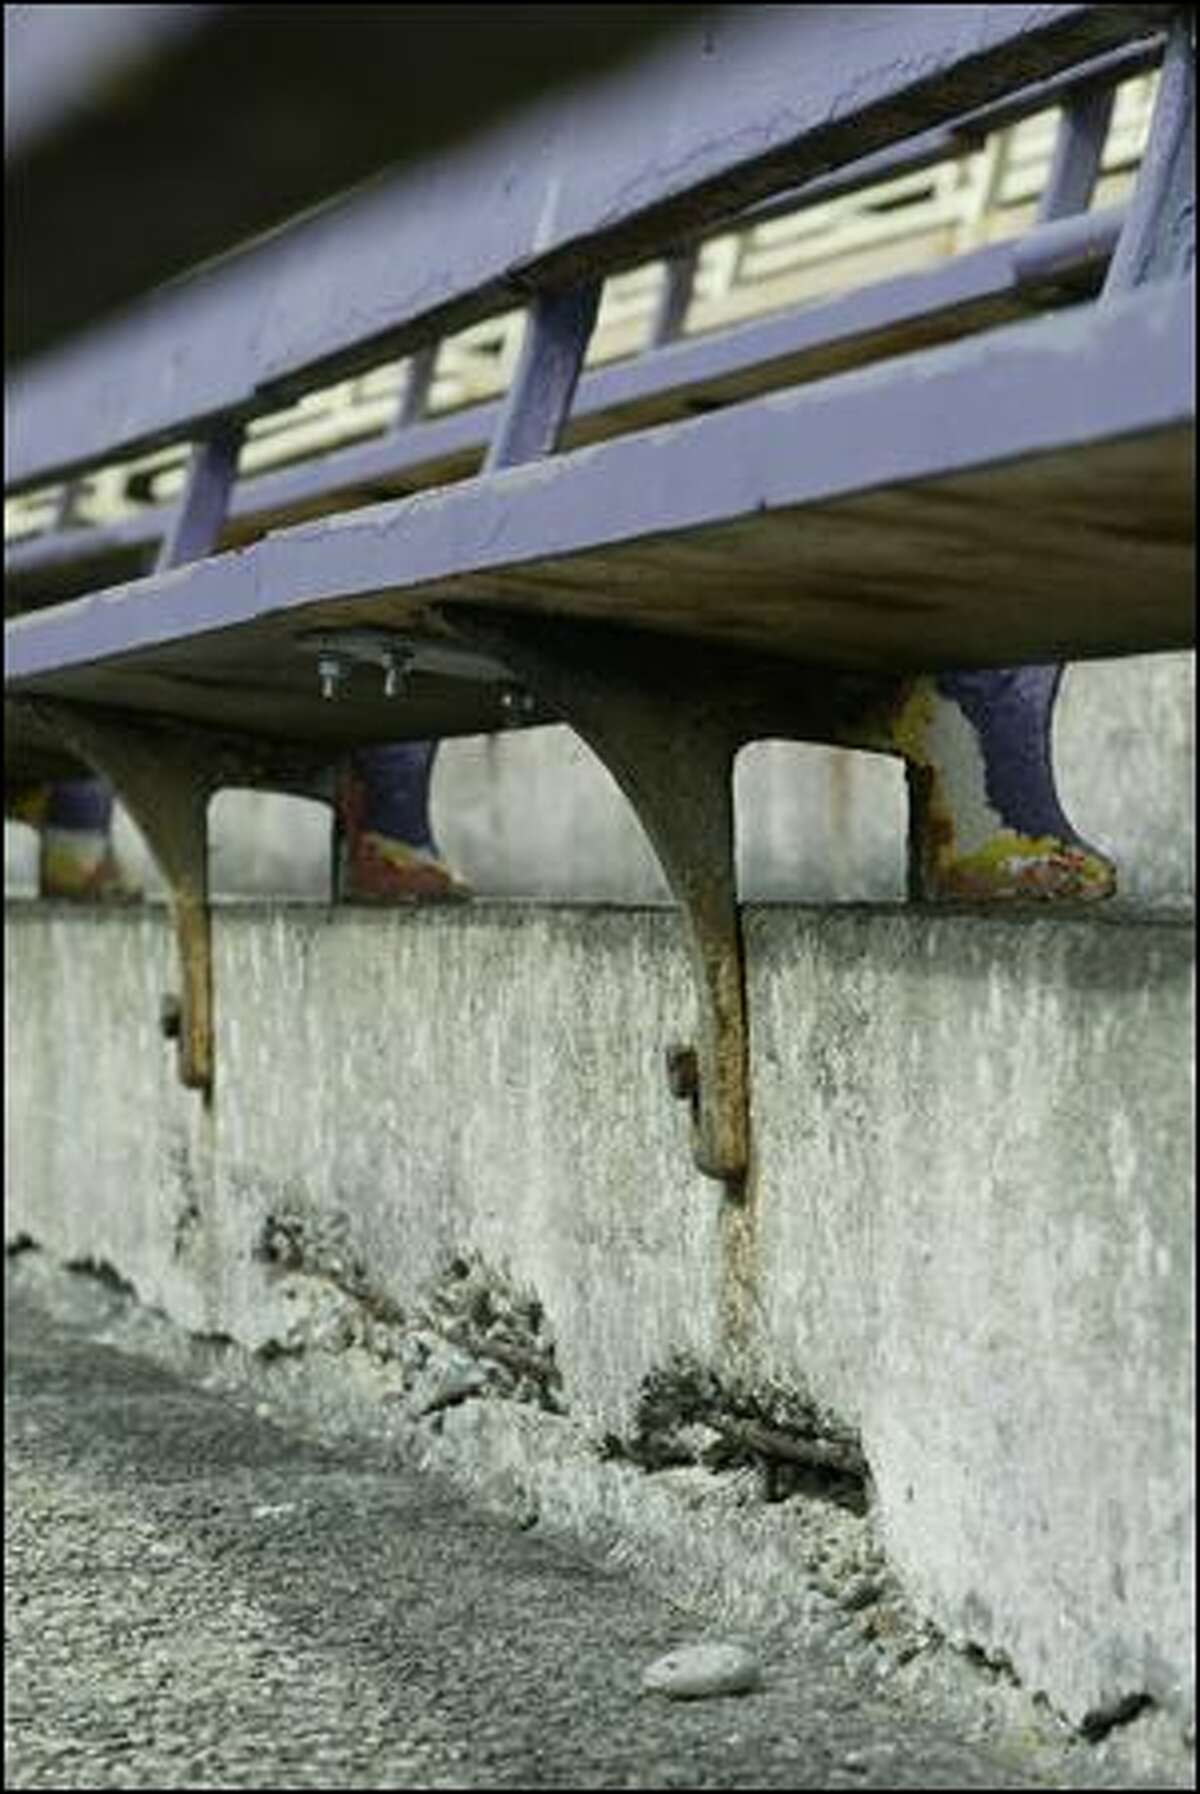 Lateral cracks in the concrete that makes up the lower bowl of Husky Stadium can be seen beneath the bleachers. (P-i File / 2007)